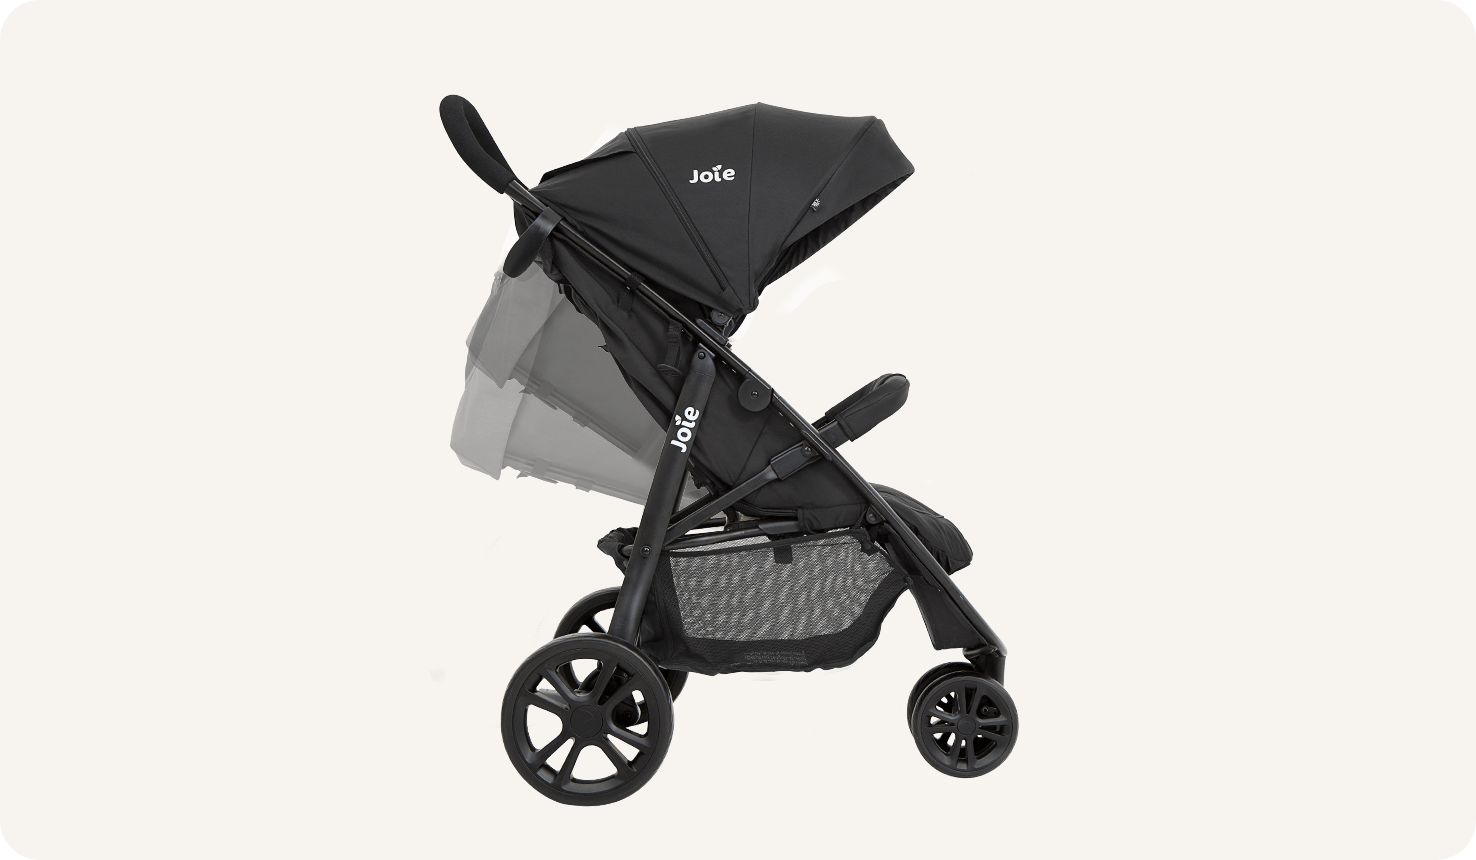   Joie litetrax 3 stroller in black facing right fully reclined.